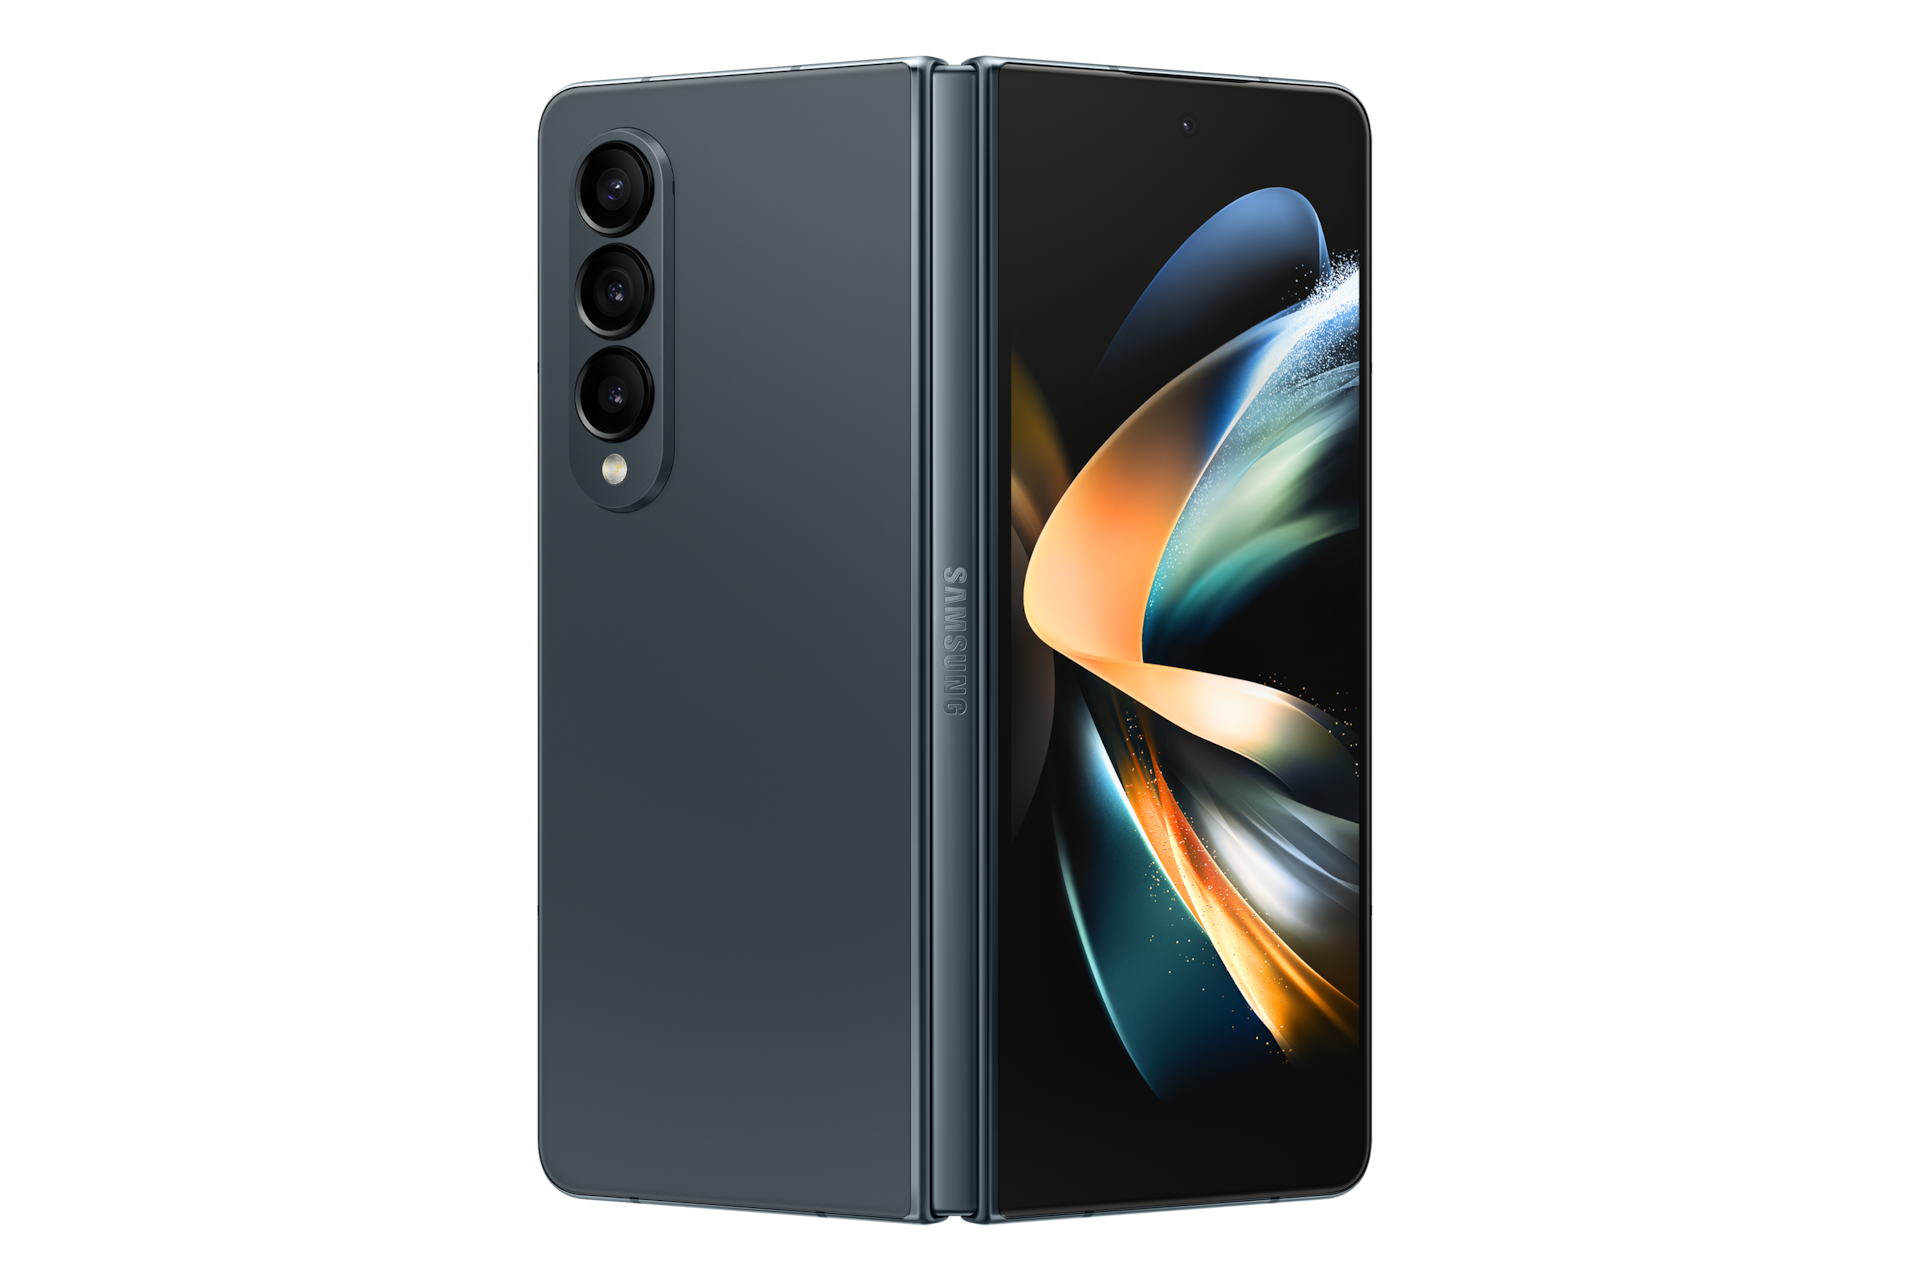 See Galaxy Fold 4 5G 246 GB specs, price, and promotions. Buy it now with discounts at Samsung Official Store in the Philippines. Partially unfolded Galaxy Fold4 in Gray green.